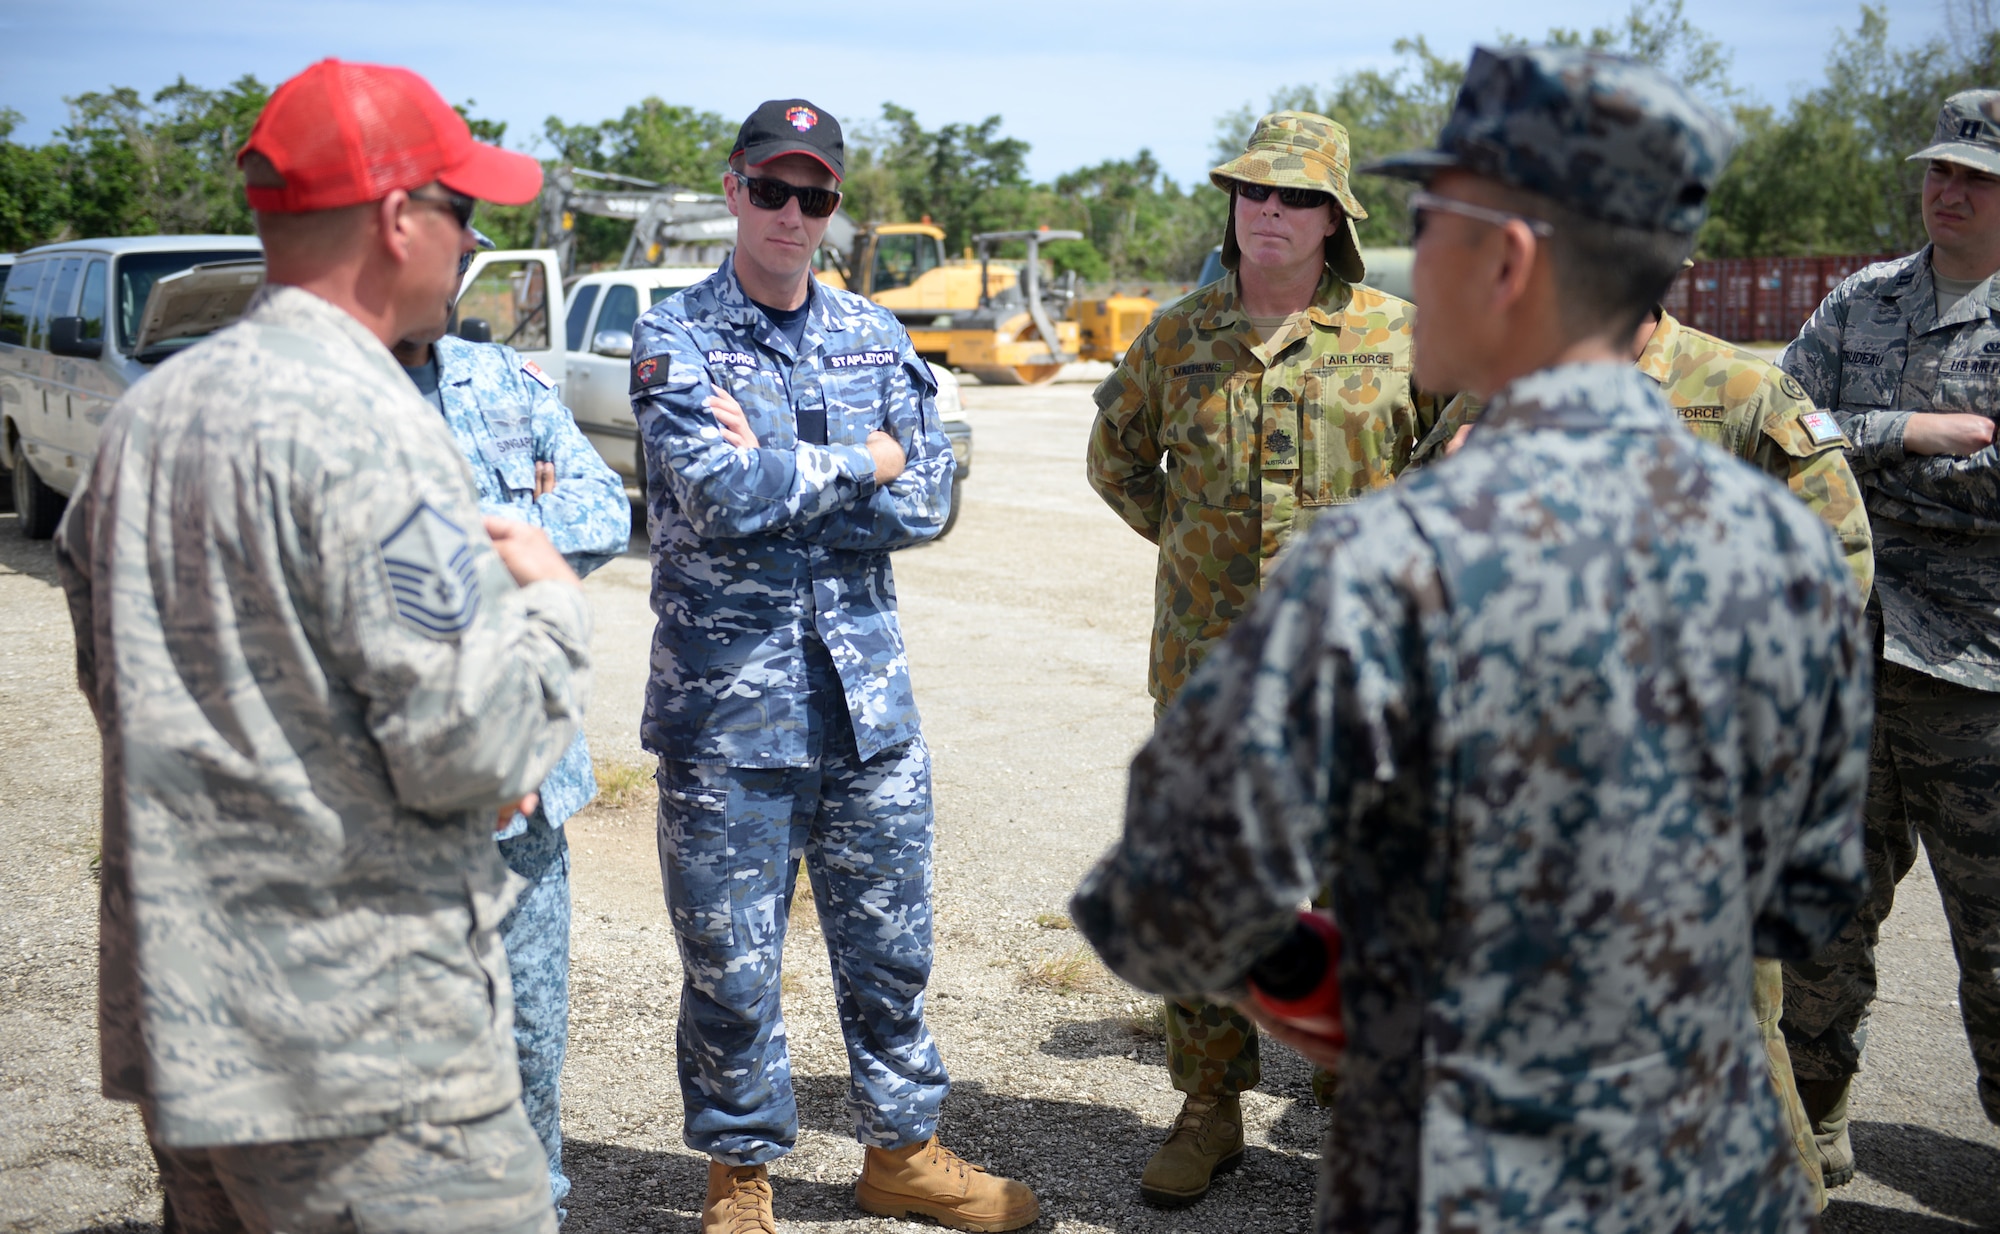 U.S. Air Force Master Sgt. Mike English, 554th RED HORSE Squadron Silver Flag instructor, explains chemical, biological, radiological and nuclear hazards to students during Partner Nation Silver Flag, Feb. 16, 2016, at Andersen Air Force Base, Guam. Silver Flag is a U.S. Pacific Command multilateral Theater Security Cooperation Program subject-matter expert exchange event designed to build partnerships and promote interoperability through the equitable exchange of civil engineer related information. This is the first multilateral Partner Nation Silver Flag. (U.S. Air Force photo by Senior Airman Joshua Smoot/Released)